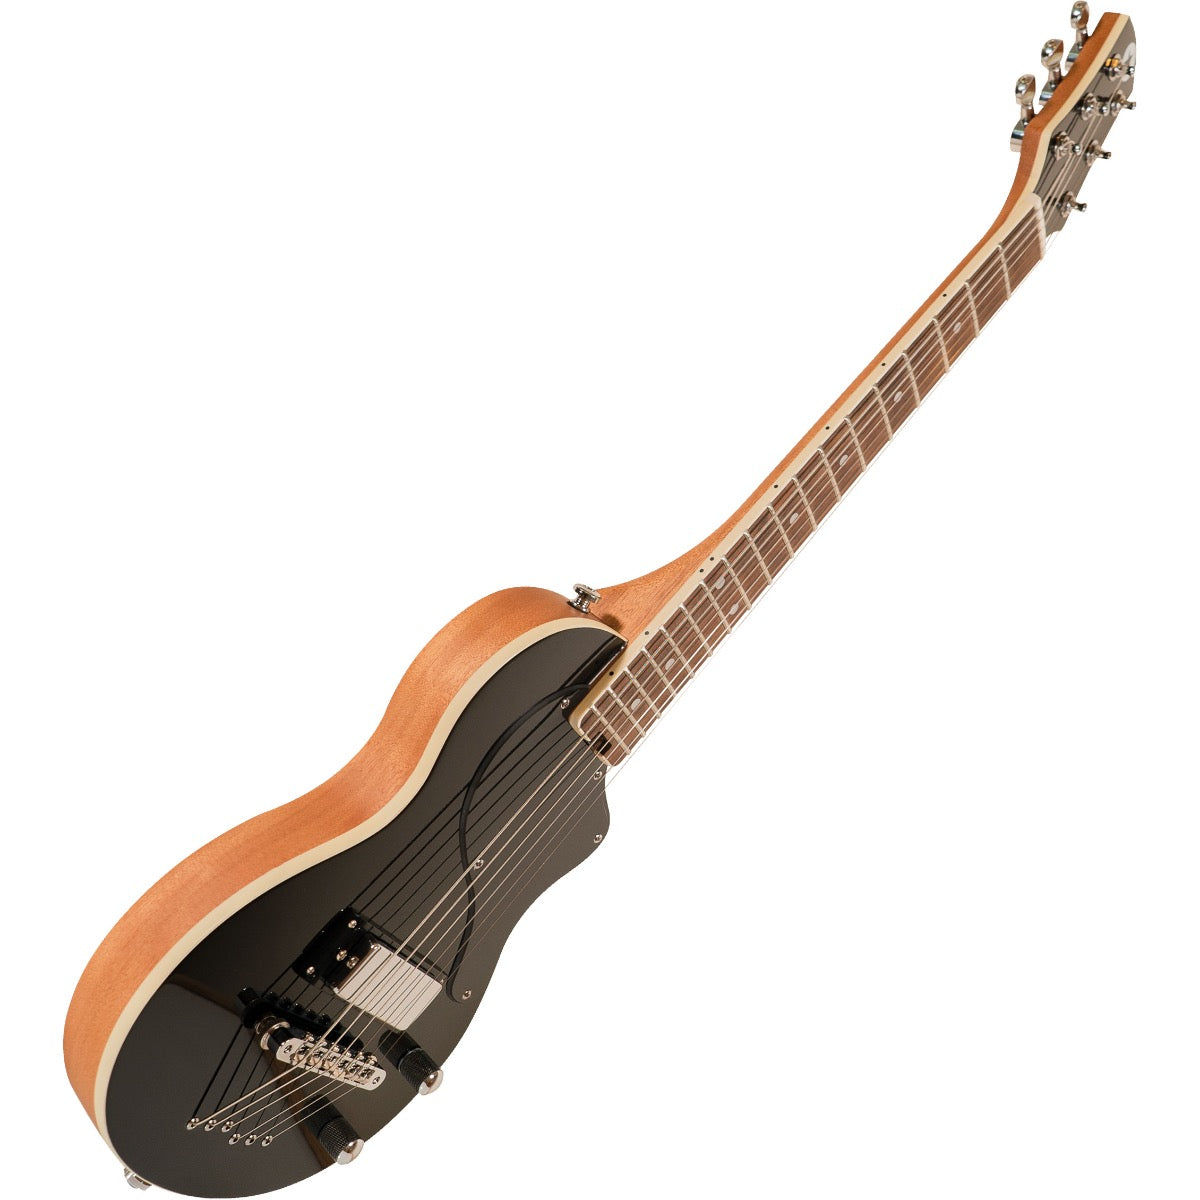 Perspective view of Blackstar Carry-On Travel Guitar - Black showing top and left side